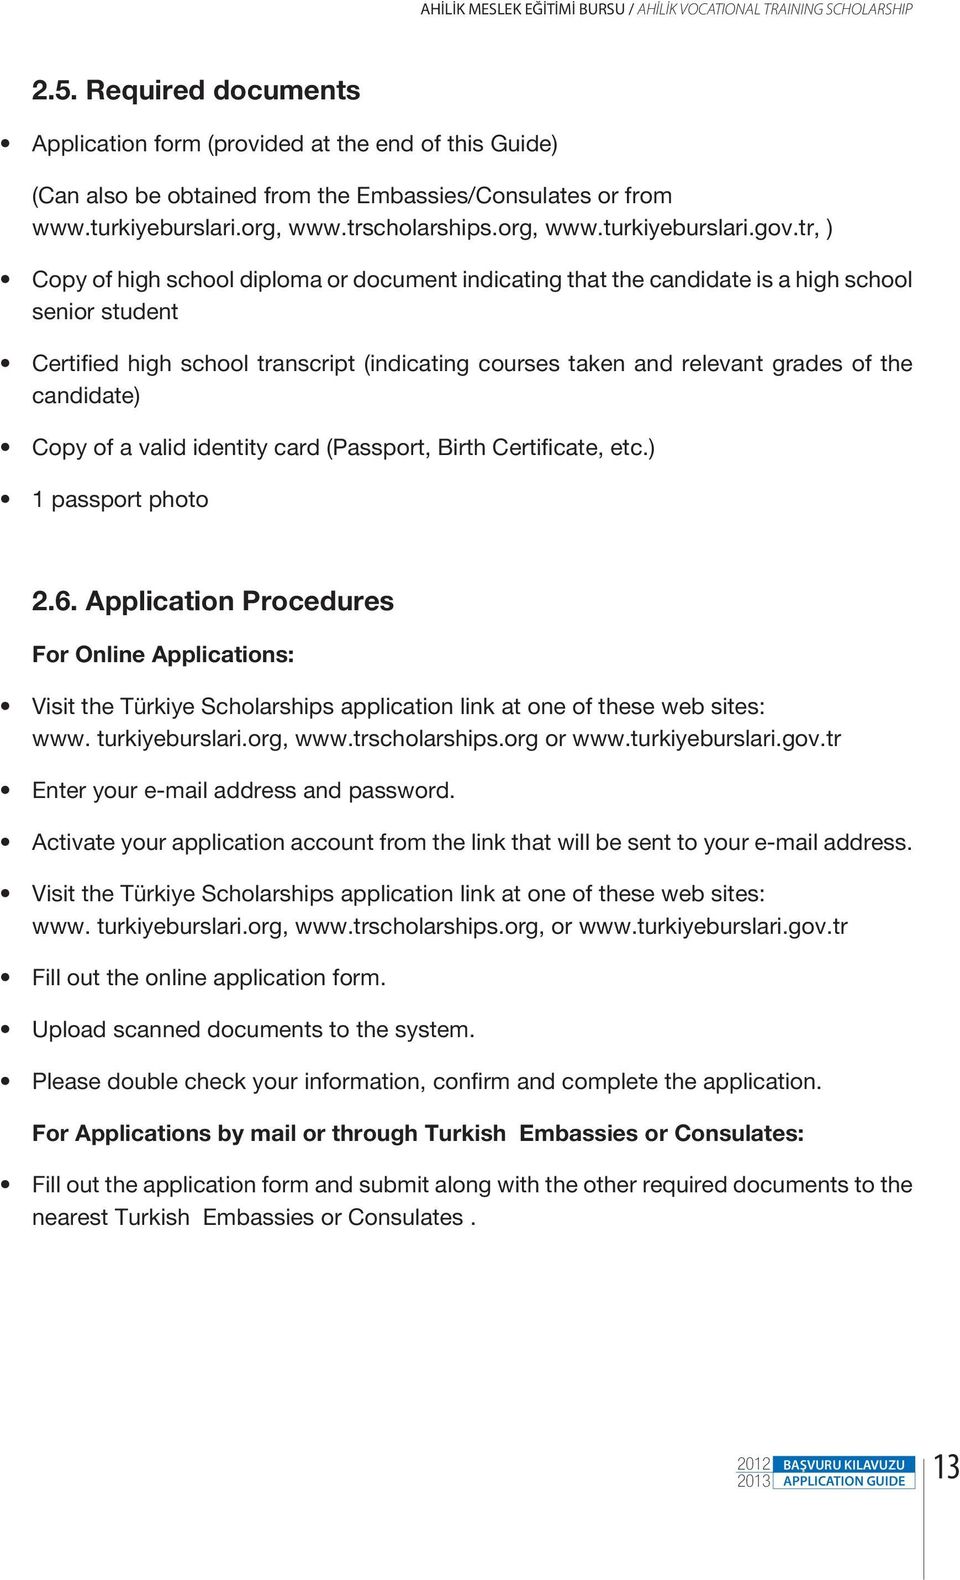 tr, ) Copy of high school diploma or document indicating that the candidate is a high school senior student Certified high school transcript (indicating courses taken and relevant grades of the